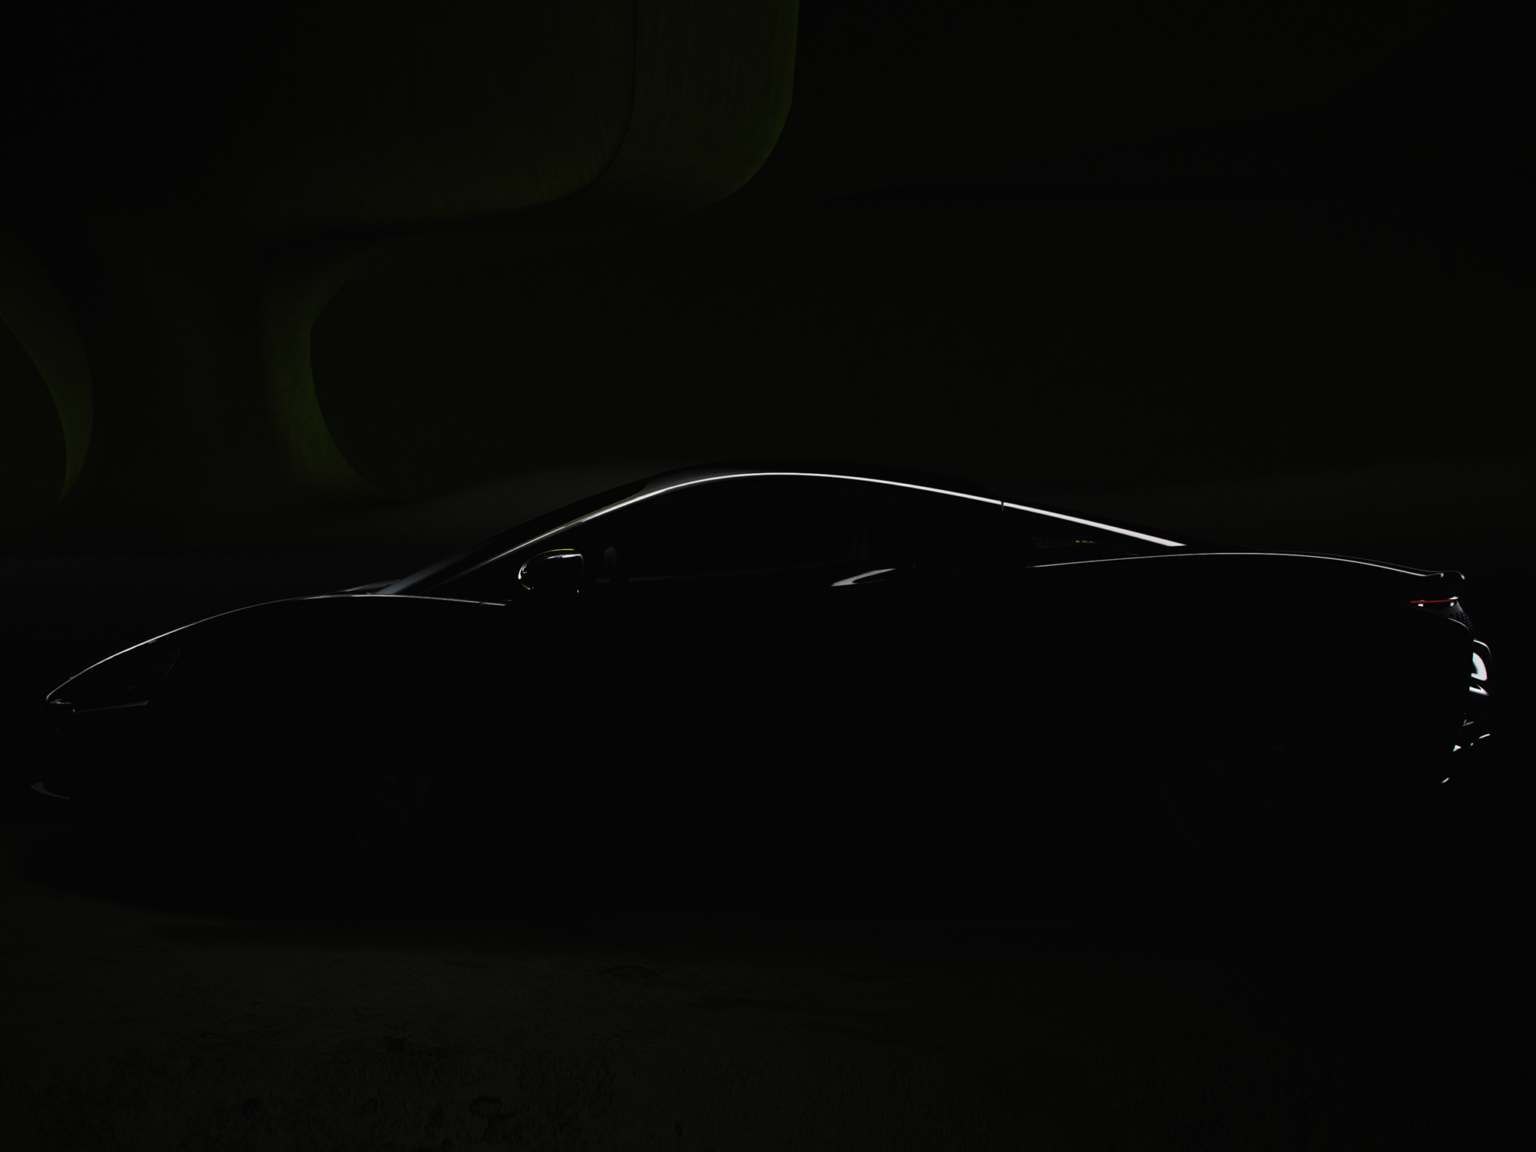 McLaren has released a teaser photo and video showing off its new hybrid car.